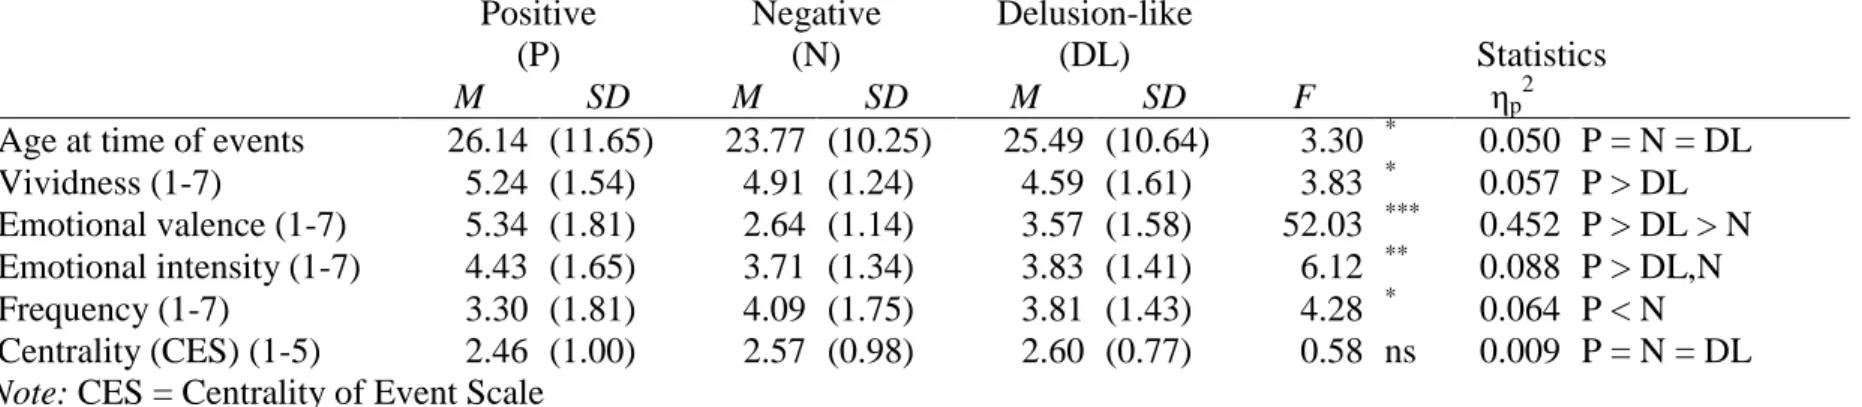 Table 5: Phenomenological characteristics and centrality of positive, negative and delusion-like memories of participants in Study 2  Positive   (P)  Negative  (N)  Delusion-like (DL)  Statistics  M  SD  M  SD  M  SD  F  η p 2